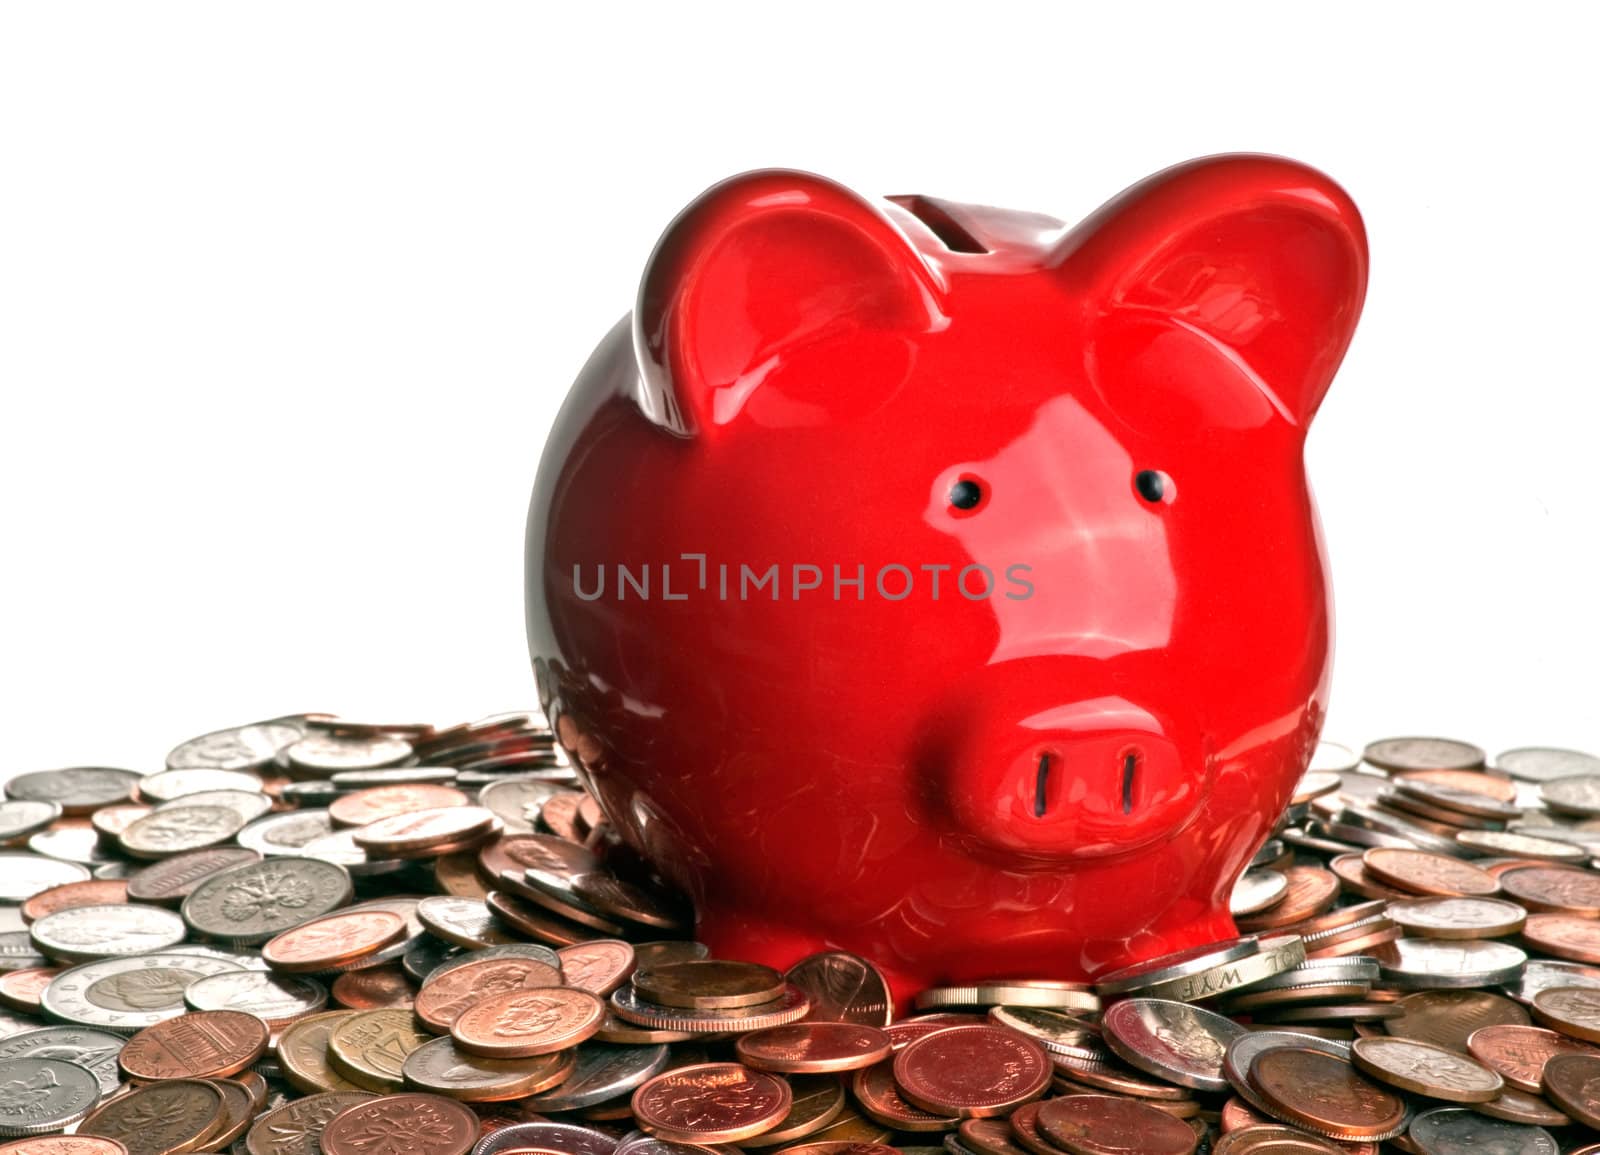 Red piggy bank isolated on white background